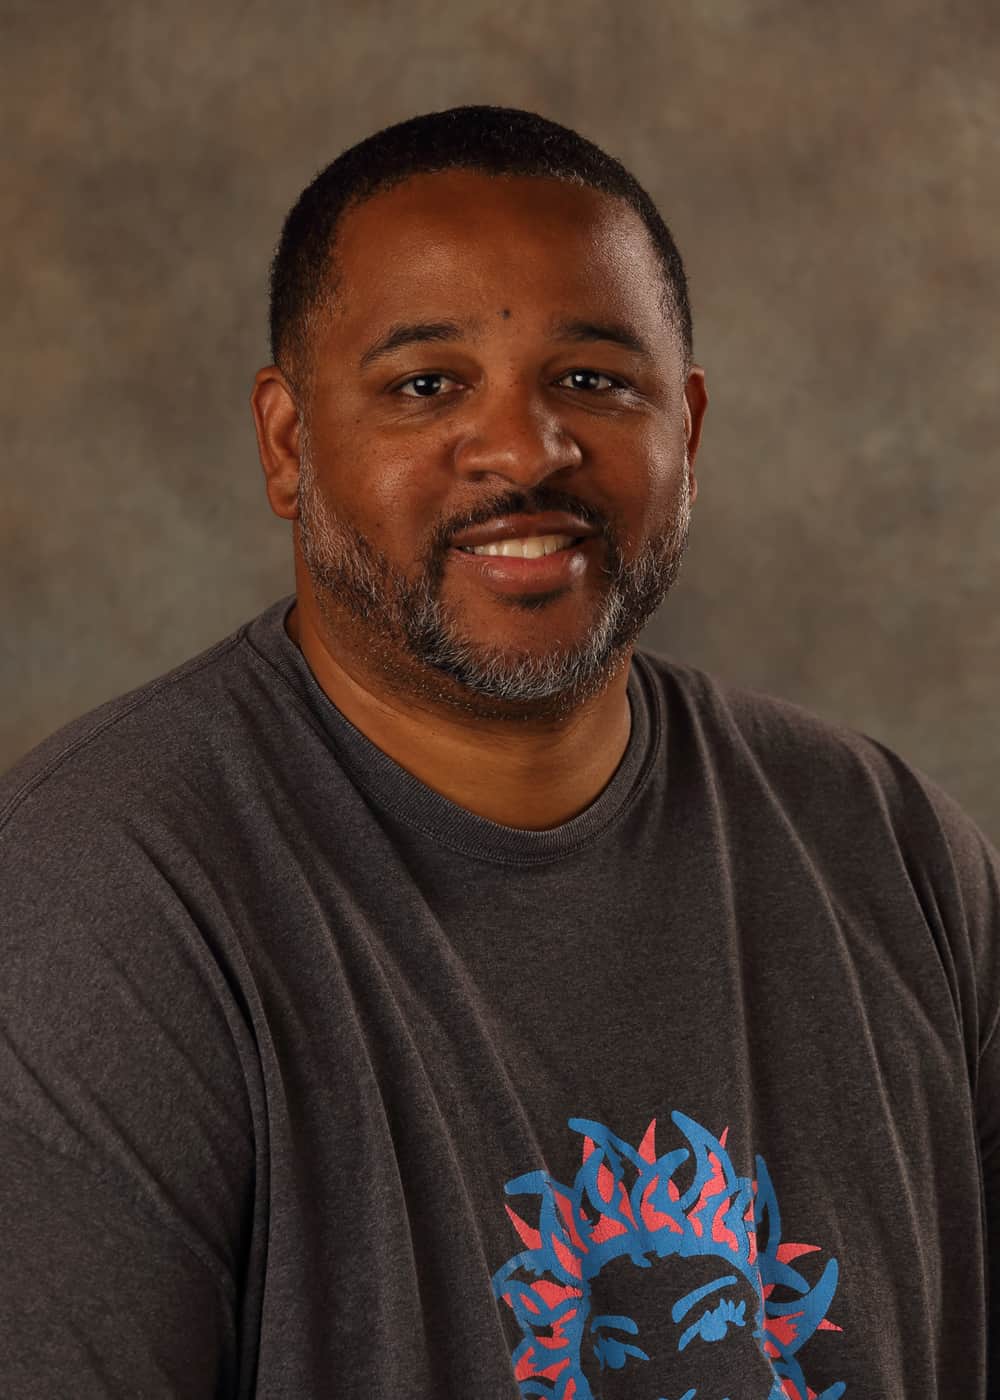 Photo of Lead Teacher Alan Powe, He is an African-American man with short hair and a beard. He is smiling and wears a dark gray shirt with a pink and blue picture of the Sun on it.